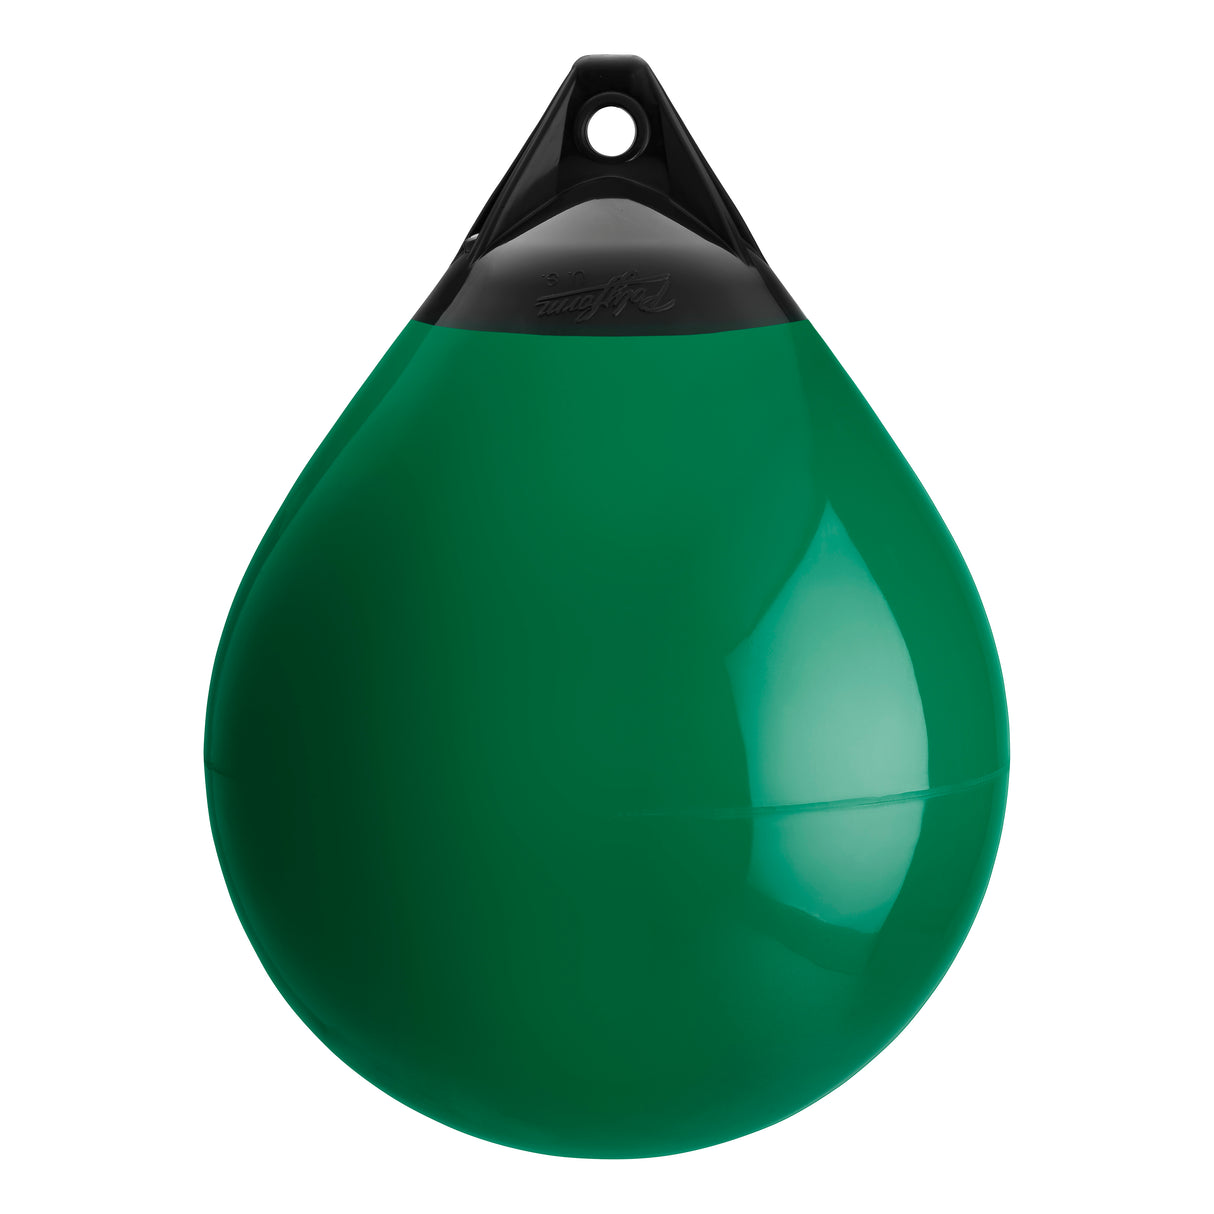 Forest Green buoy with Black-Top, Polyform A-4